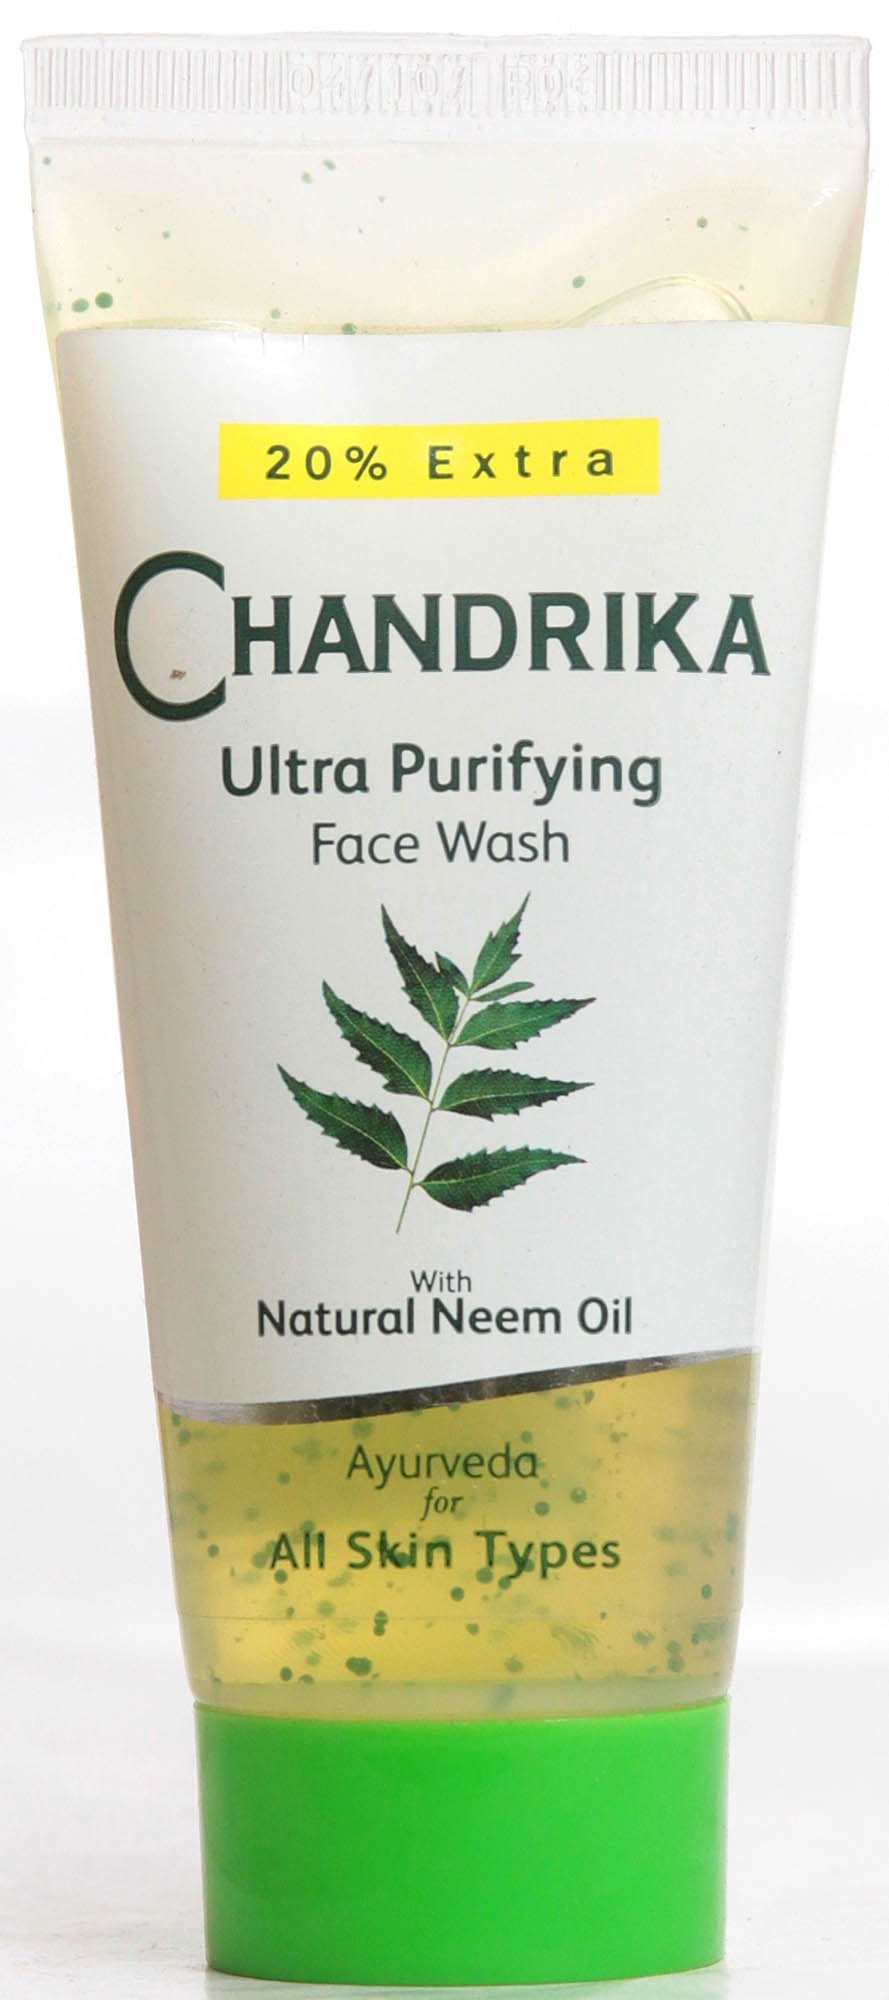 ChandrikaUltra Purifying Face Wash - book cover